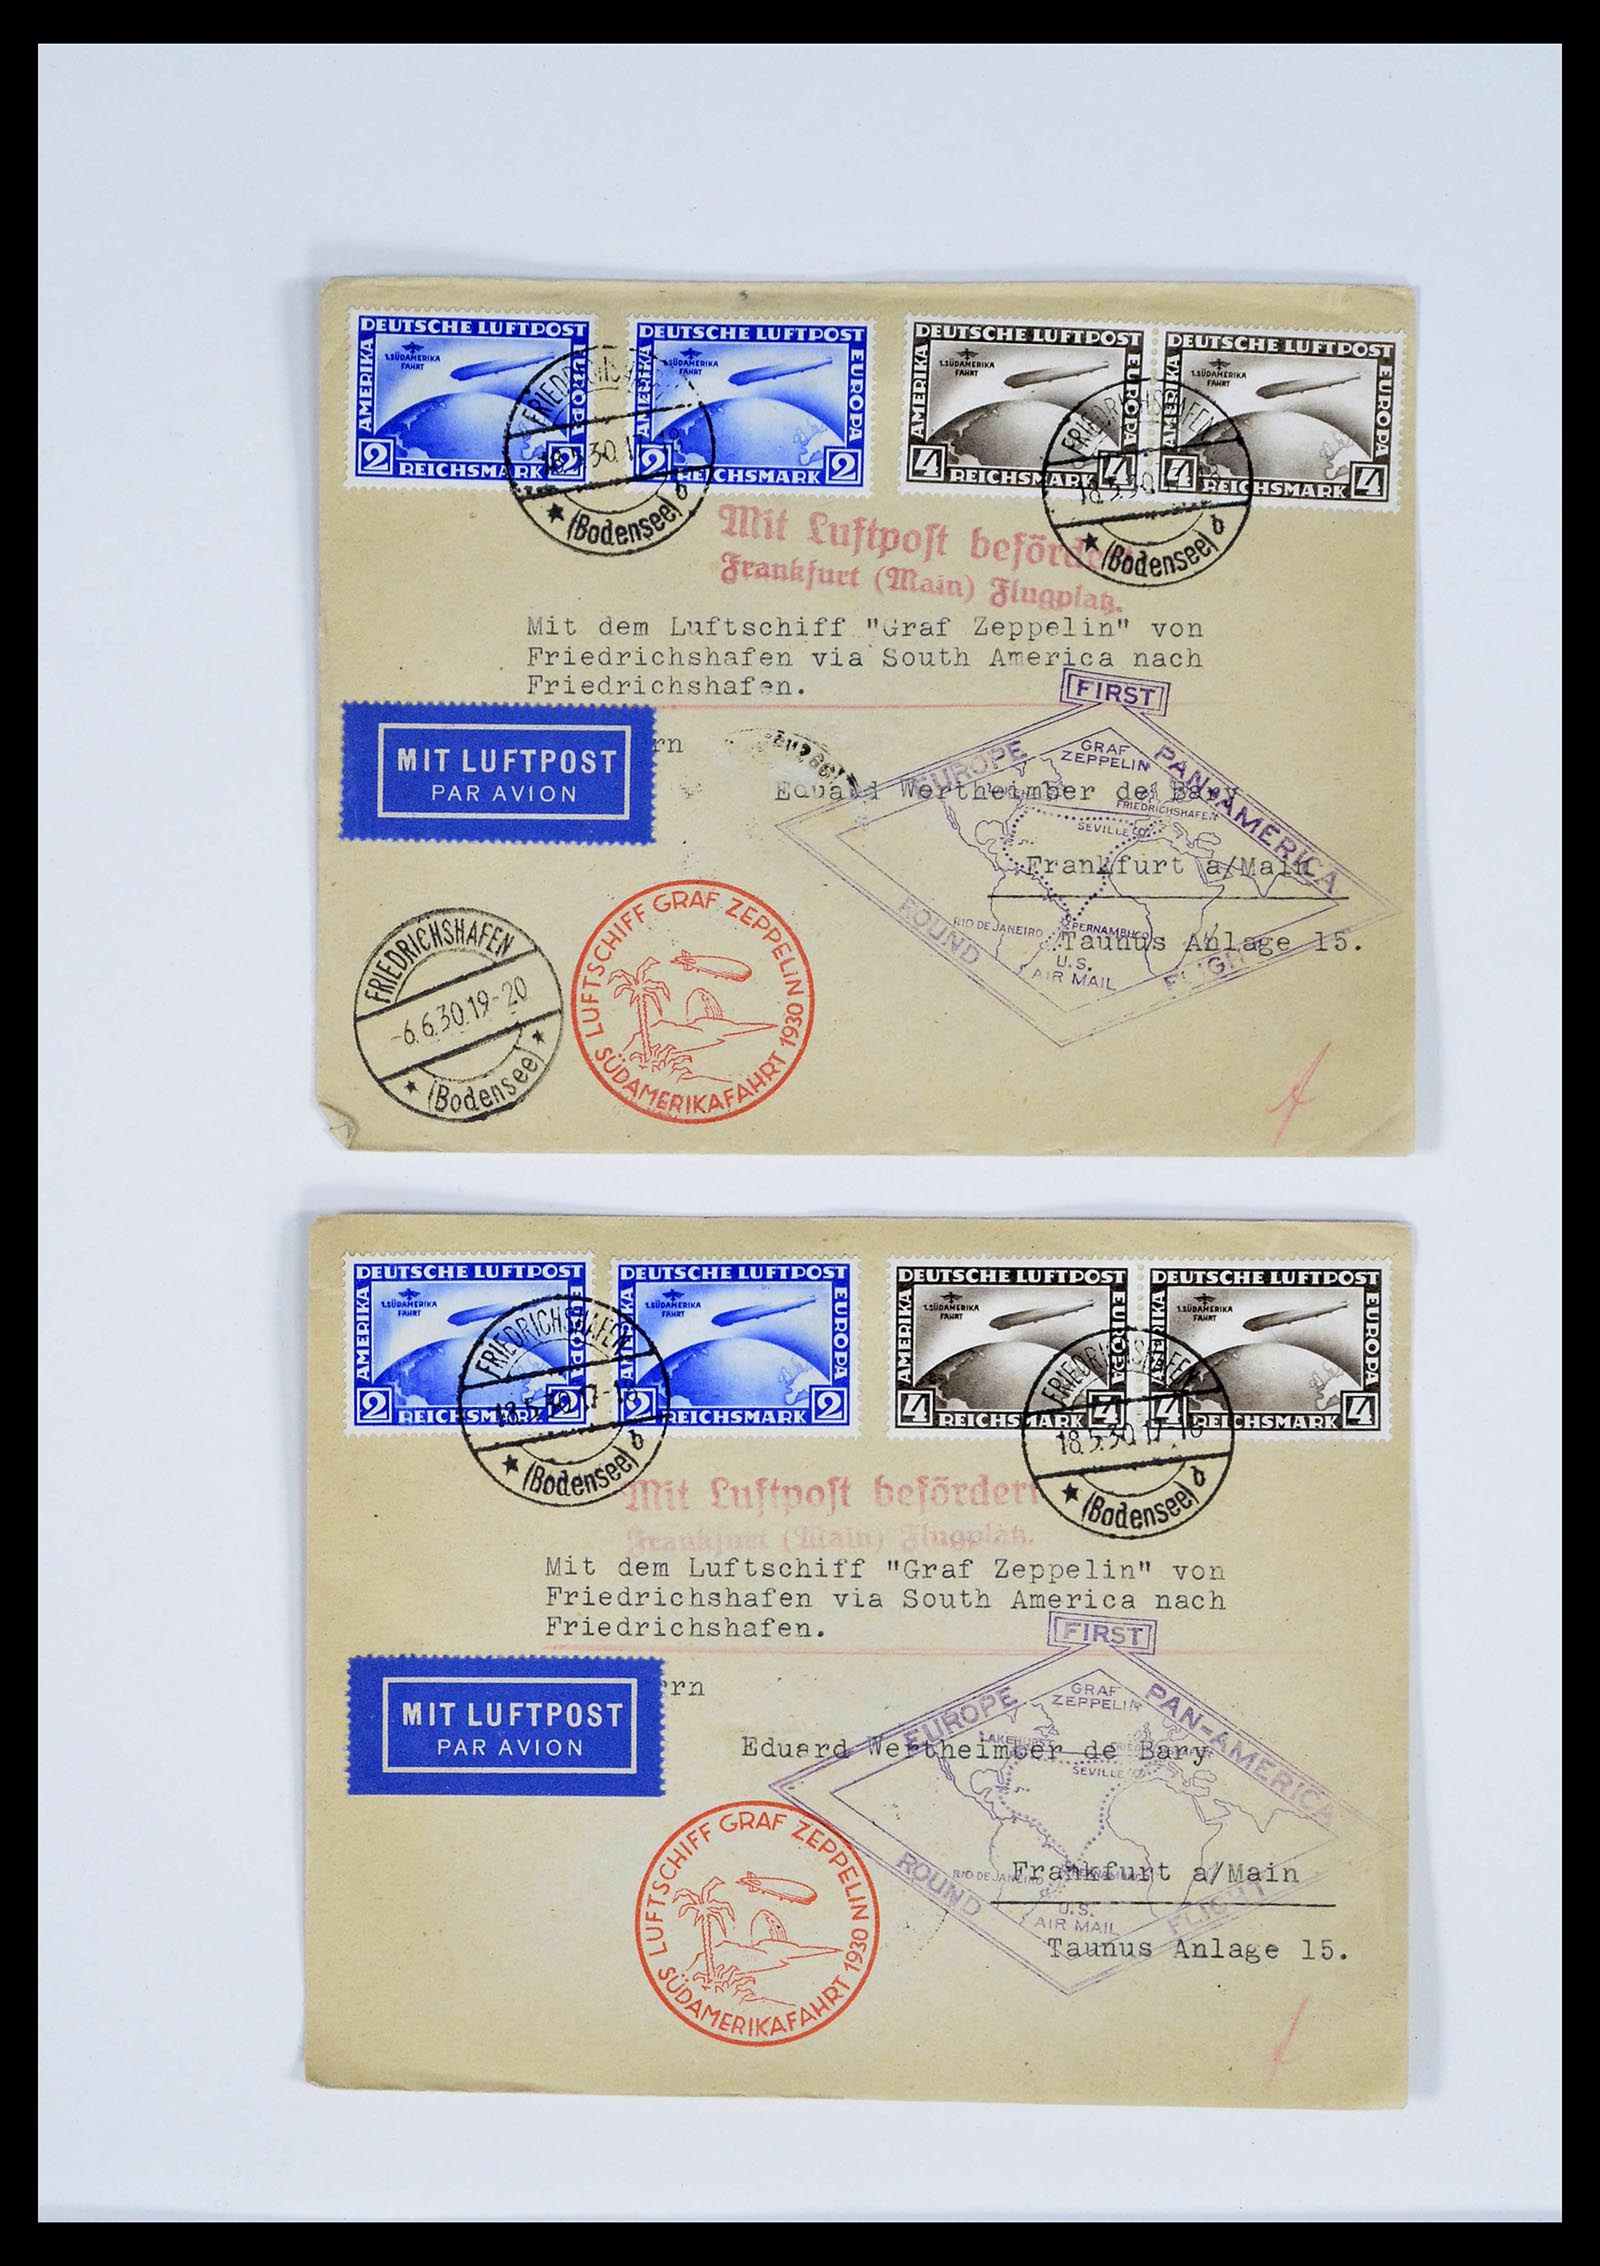 39032 0010 - Stamp collection 39032 Zeppelin covers 1928-1933.